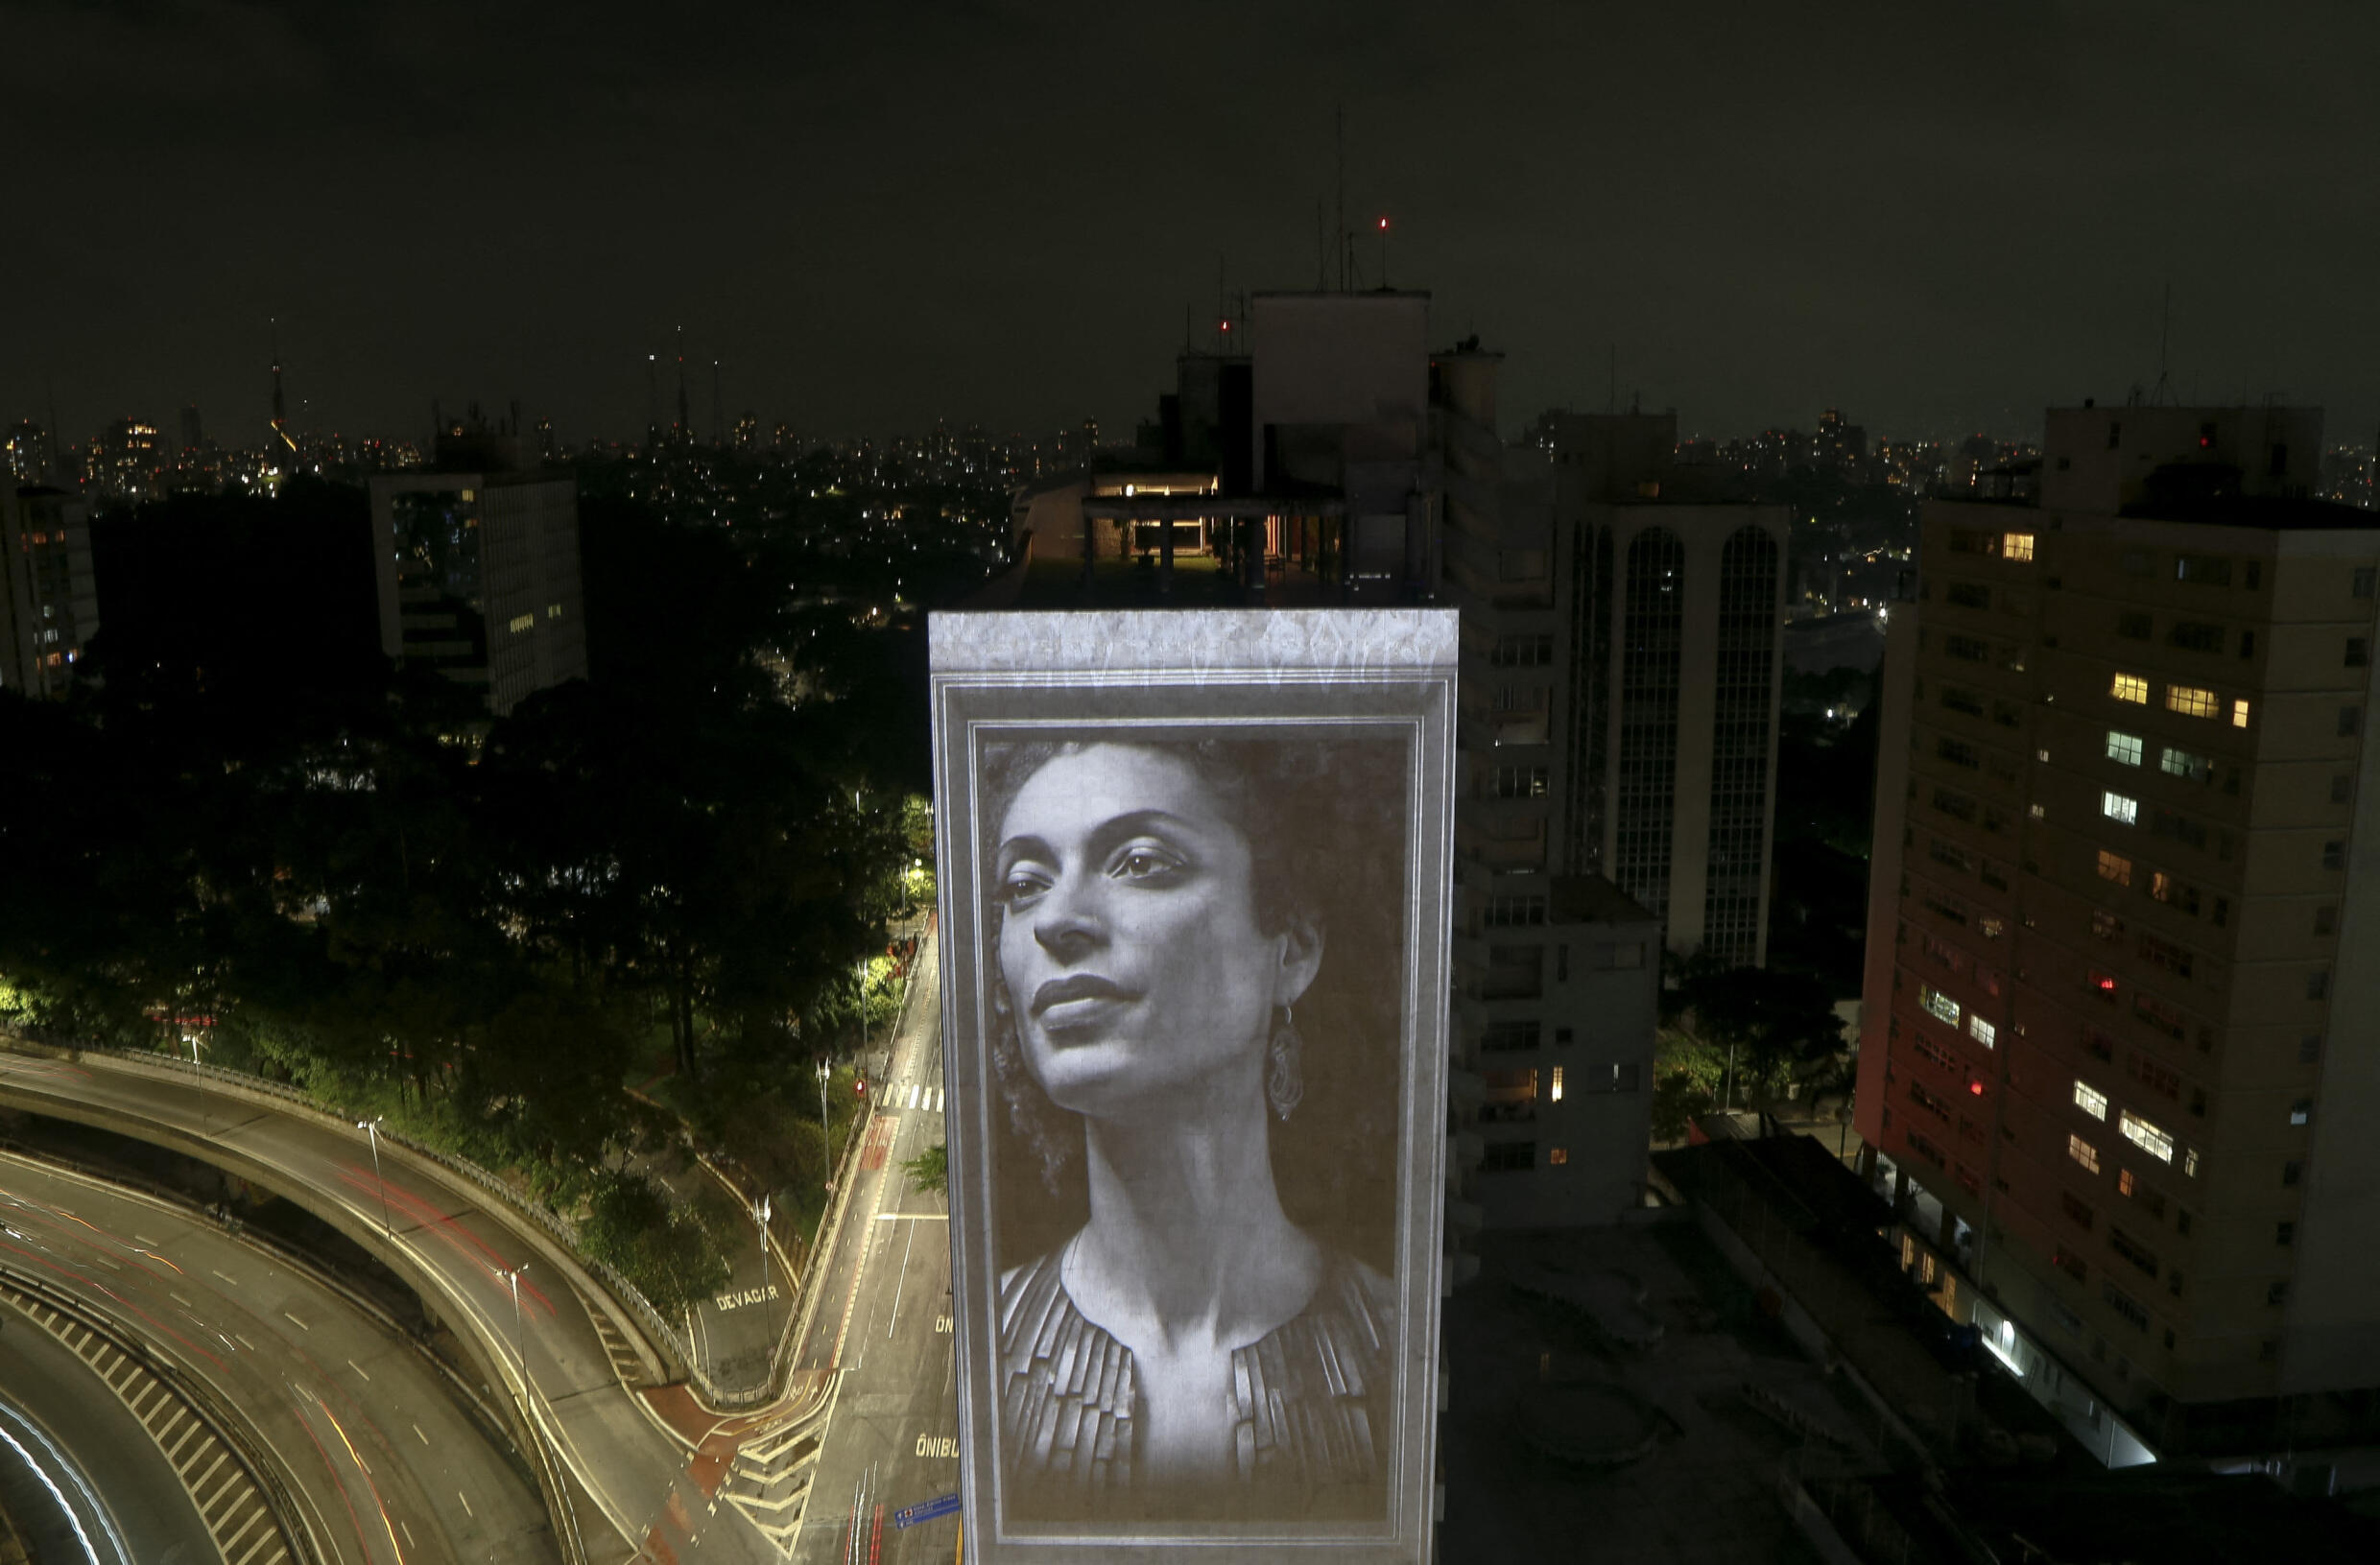 An image of slain Brazilian human rights activist and politician Marielle Franco is projected onto the side of the Anchieta Building on the fifth anniversary of her assassination, as part of a tribute by visual artist Alexis Anastasiou to slain human rights activists, in Sao Paulo, Brazil, on March 14, 2023.